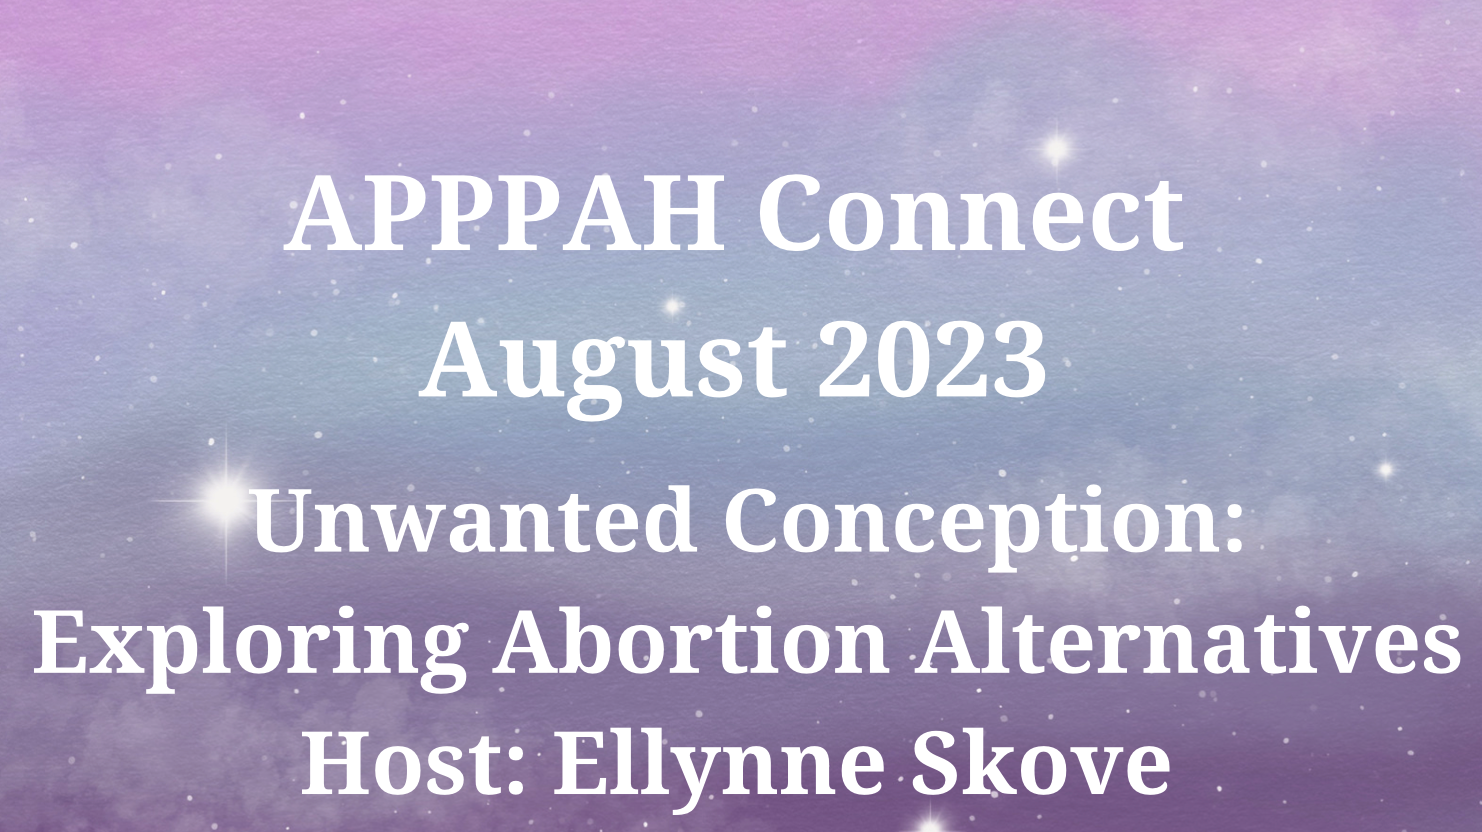 APPPAH Connect August Unwanted Conception: Exploring Abortion Alternatives